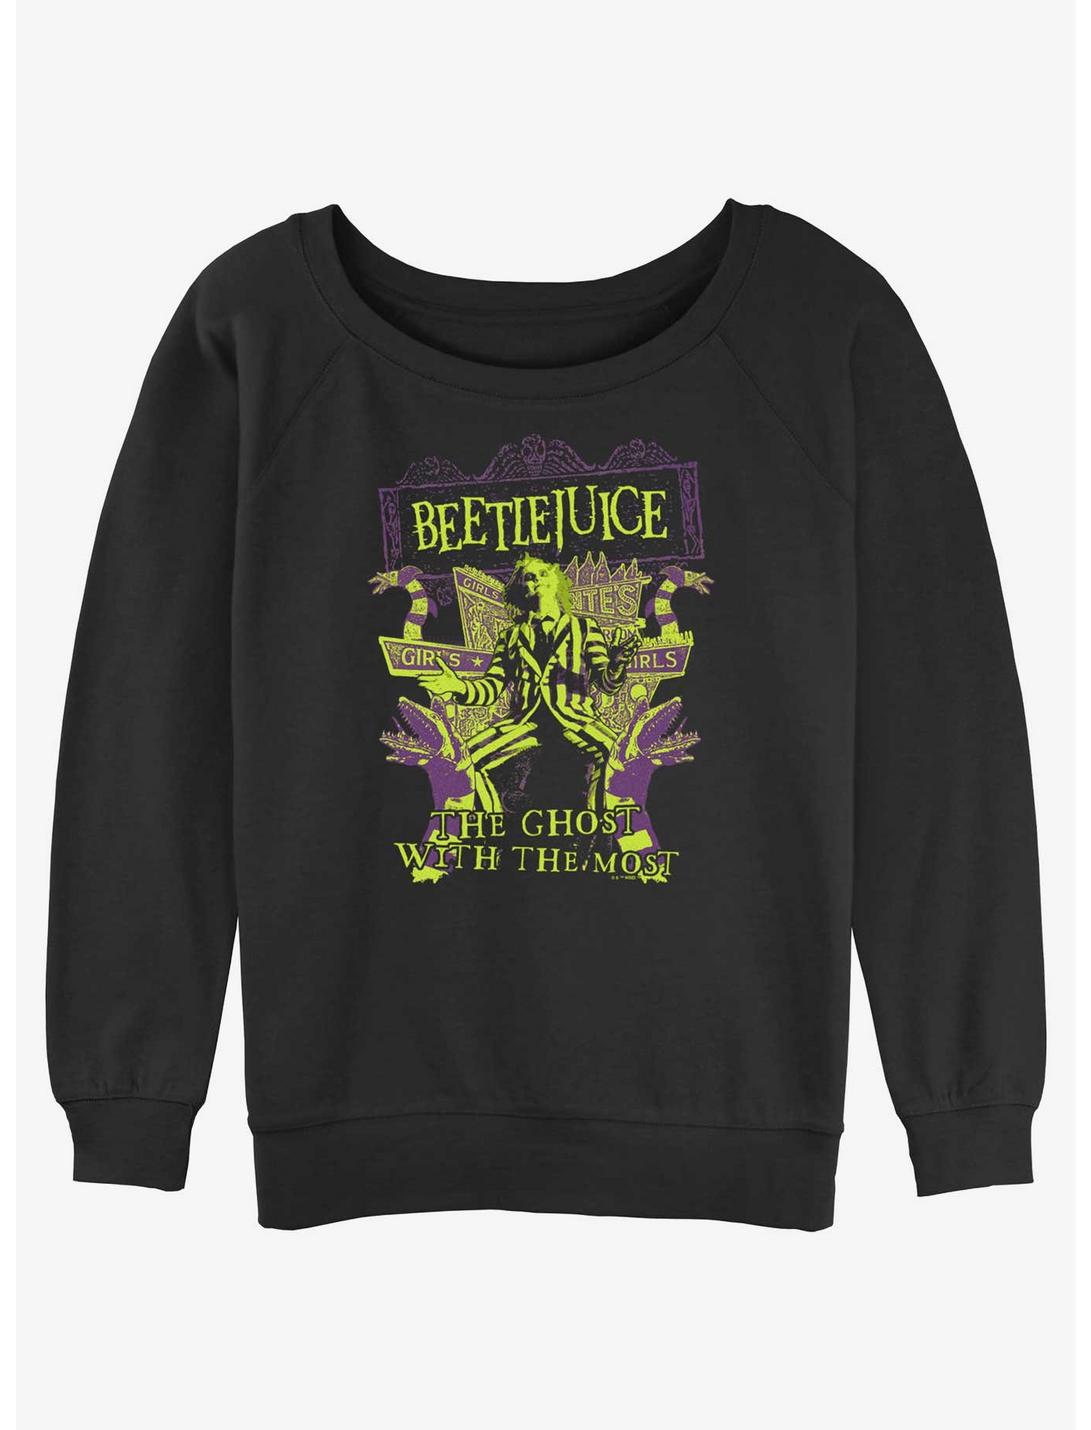 Beetlejuice Ghost With The Most Womens Slouchy Sweatshirt, BLACK, hi-res